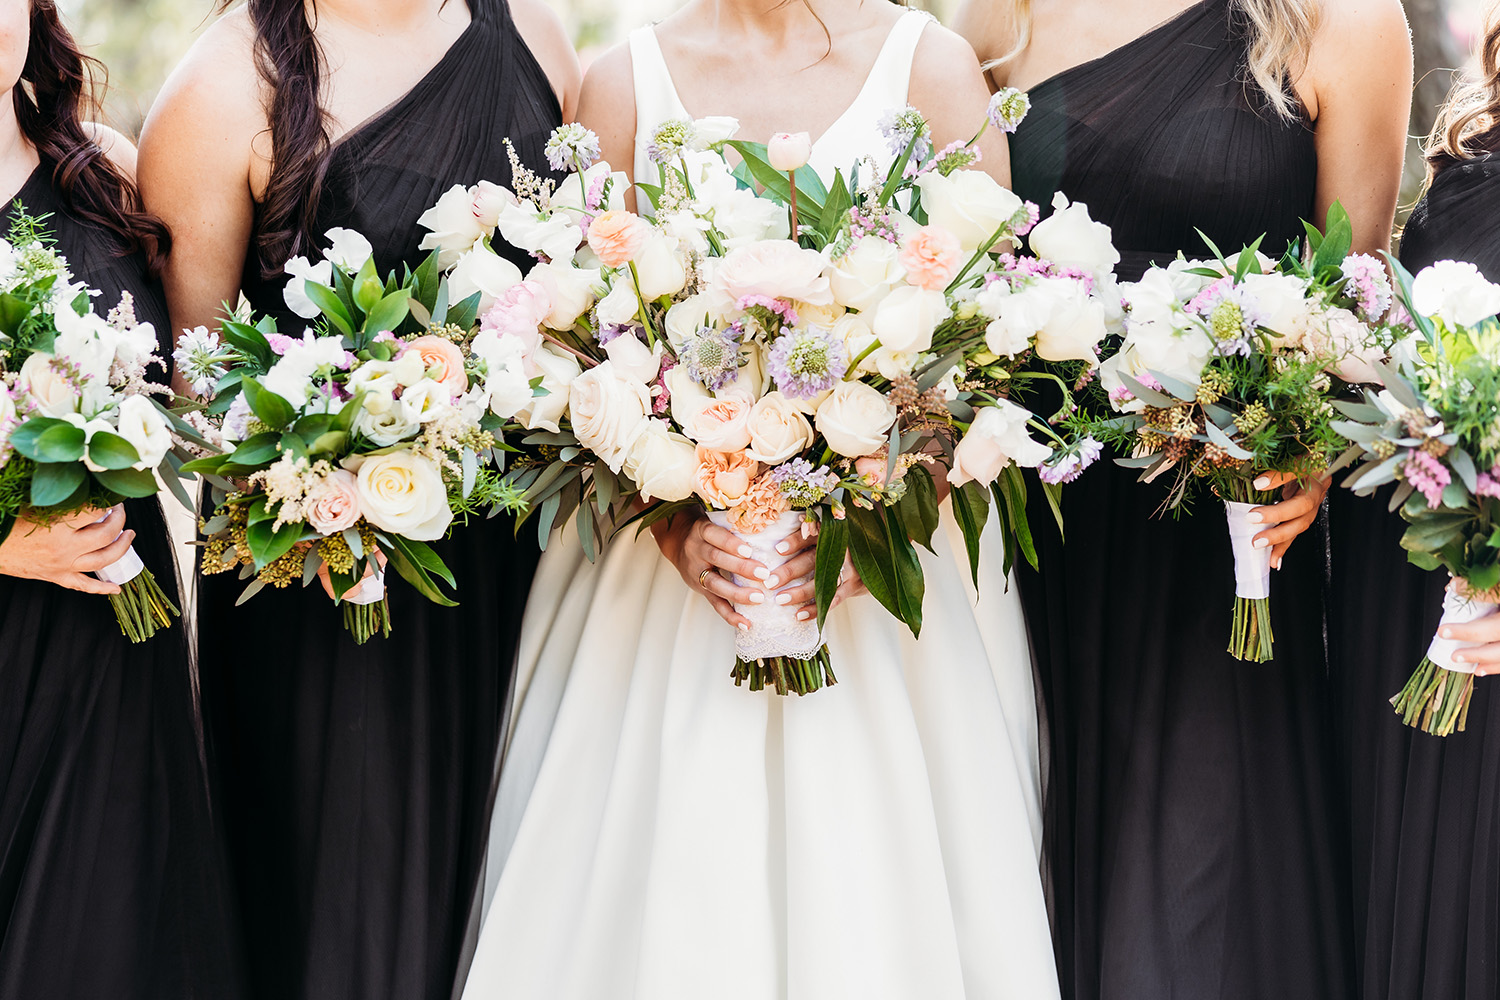 Bride and bridesmaids holding bouquets.